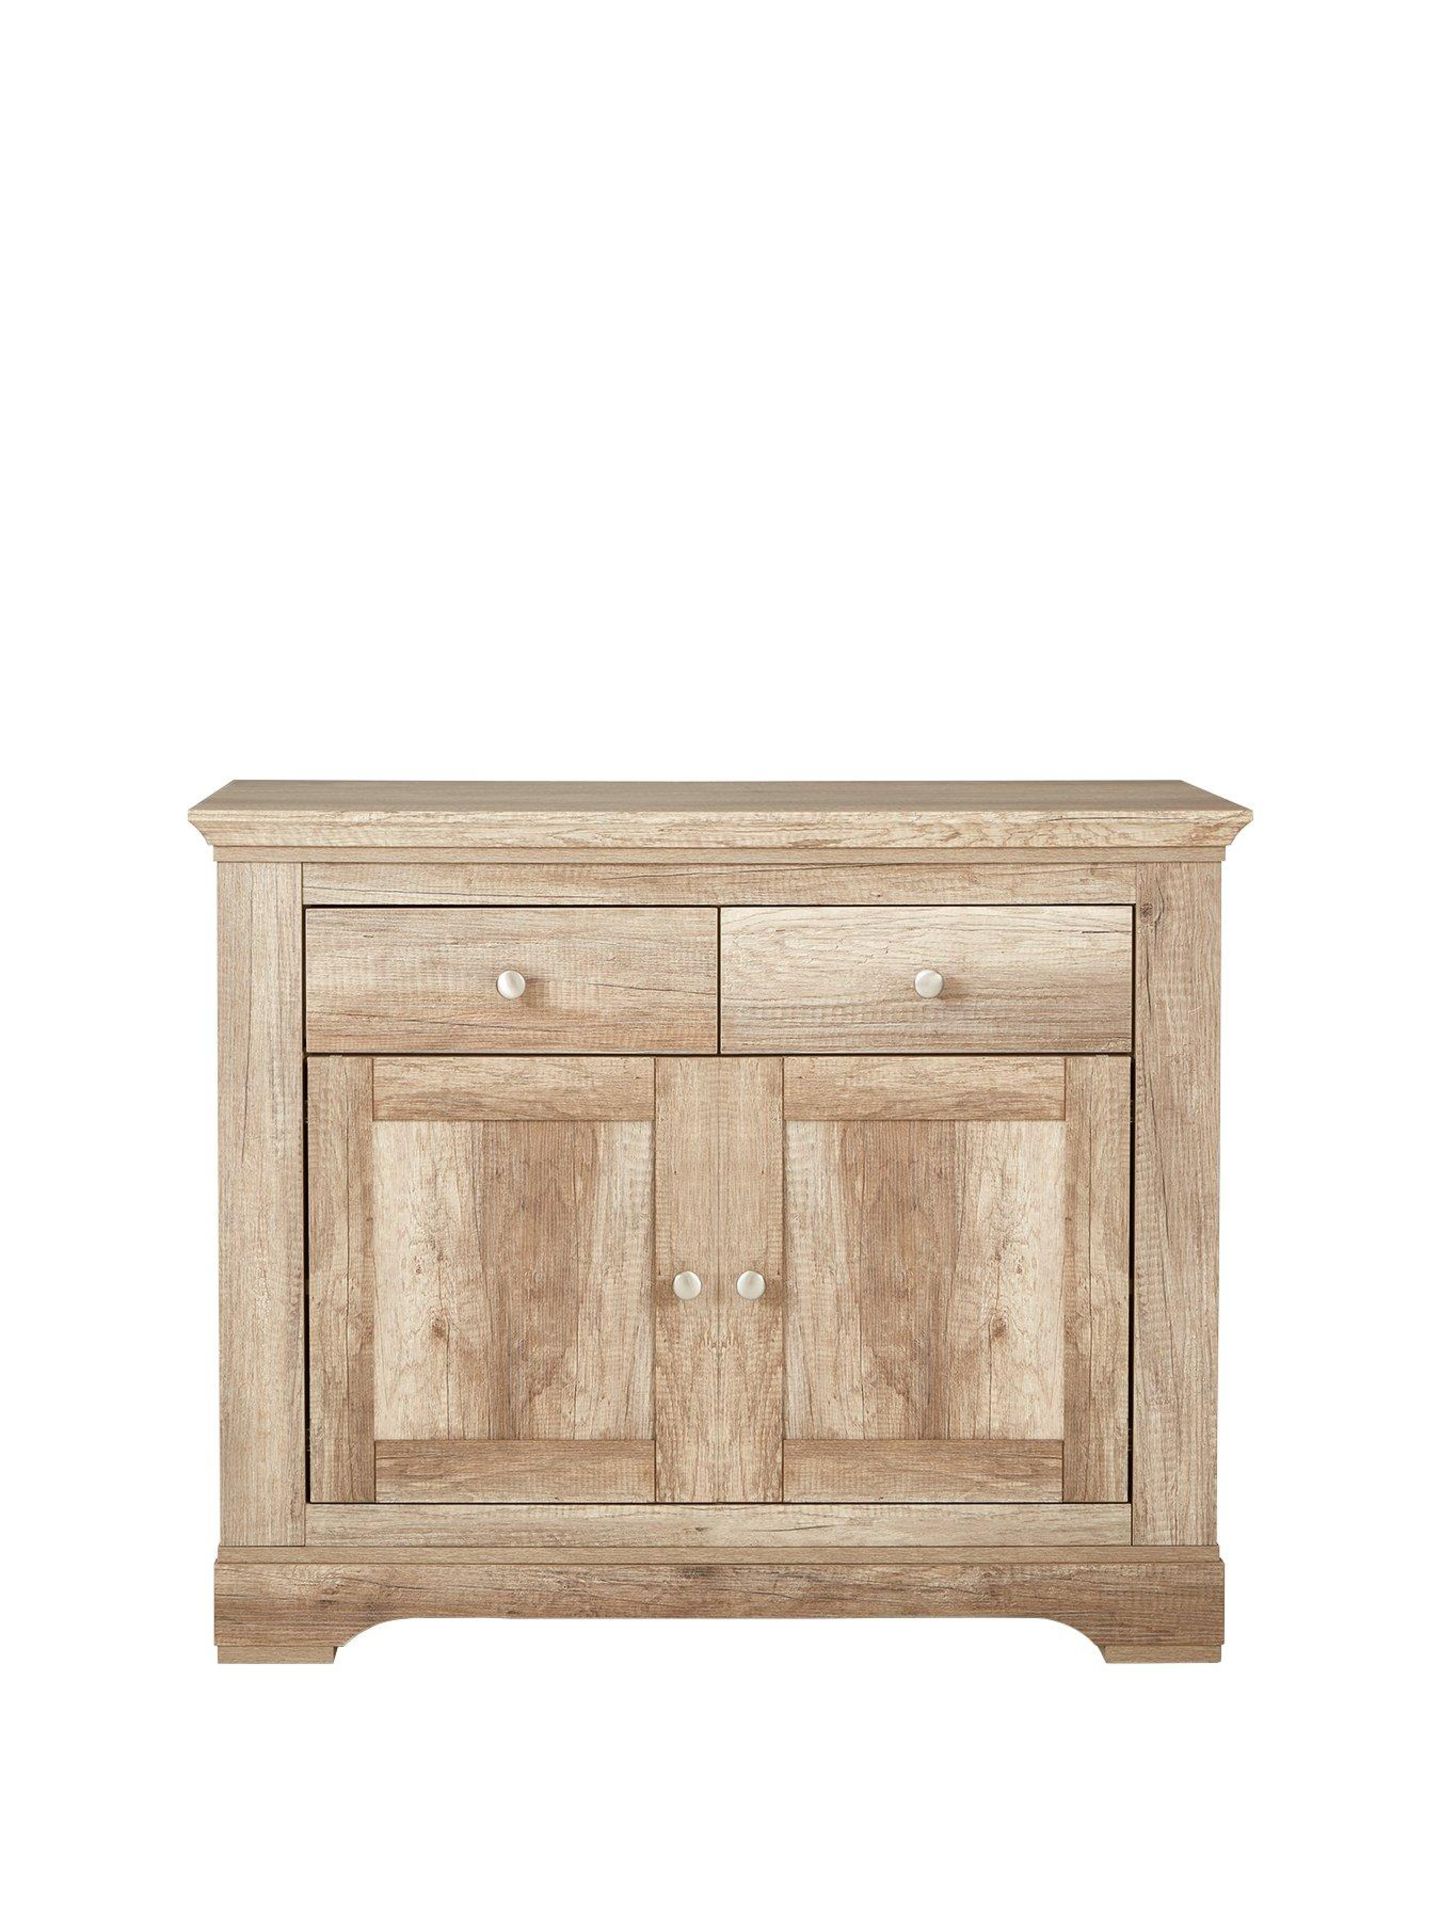 Boxed Item Ideal Home Wiltshire 2 Doors 2 Drawers Compact Sideboard [Oak] 83X99X43Cm Rrp:£286.0